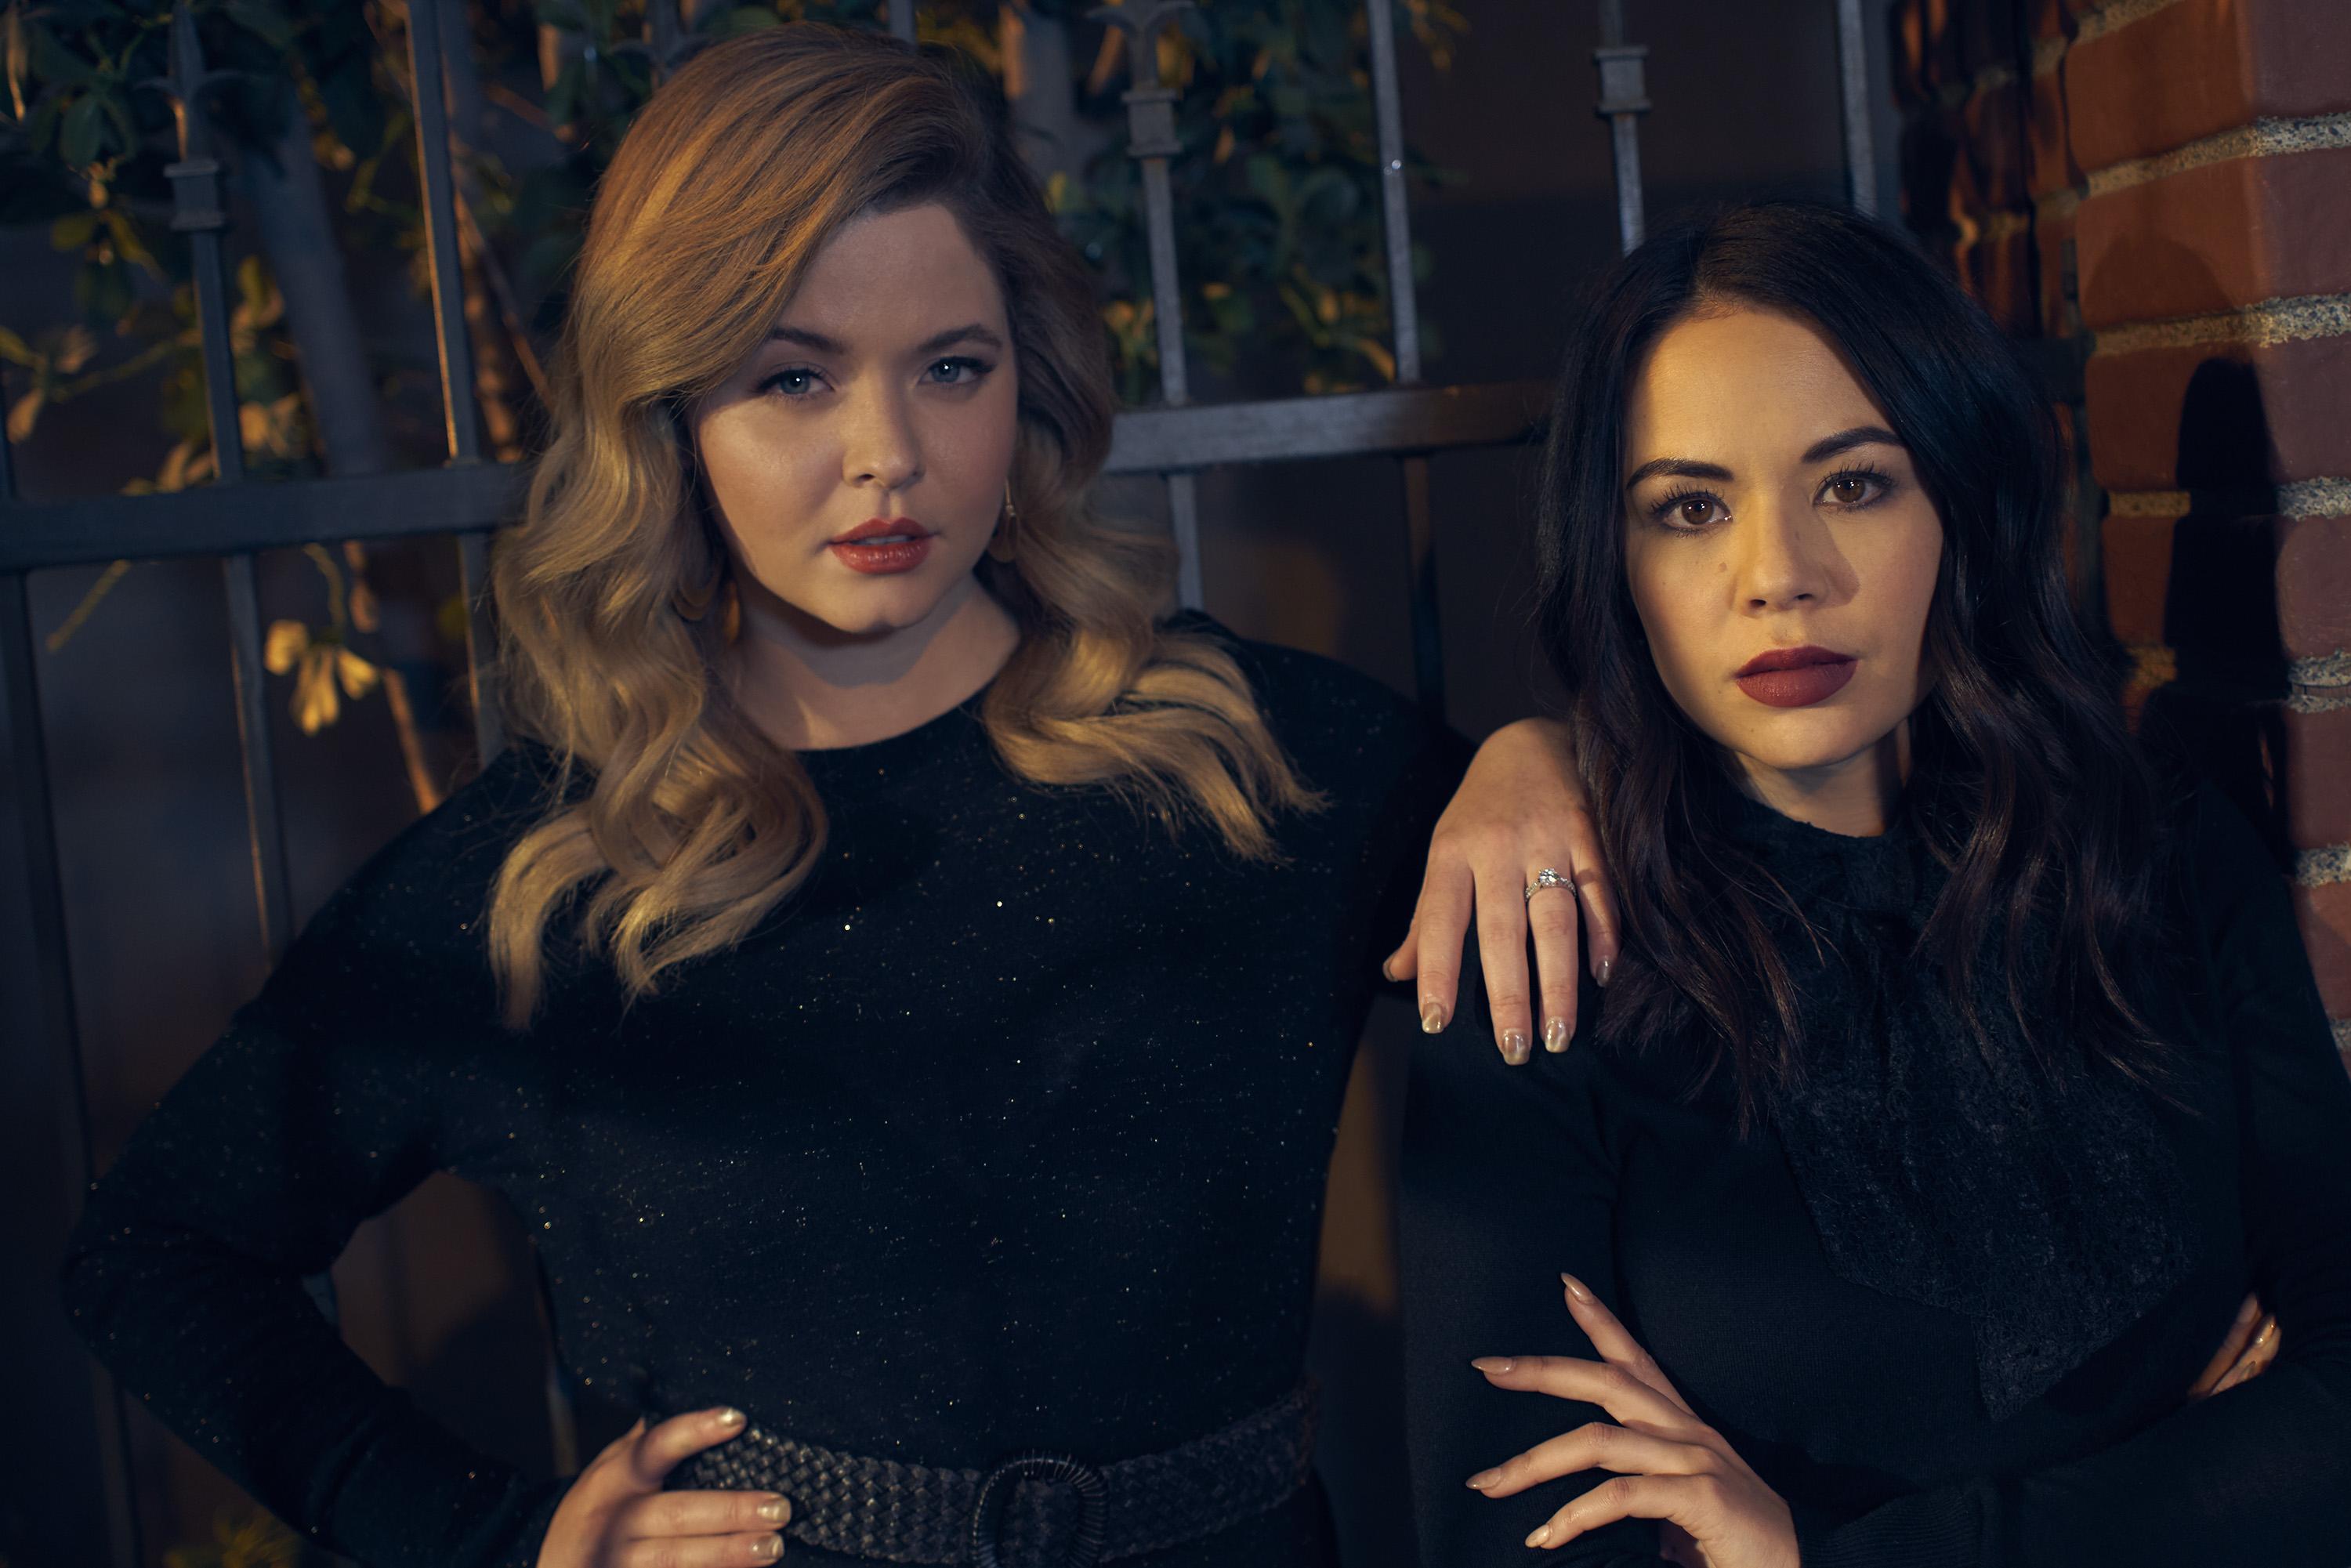 Pretty Little Liars: The Perfectionists HD Wallpaper. Background